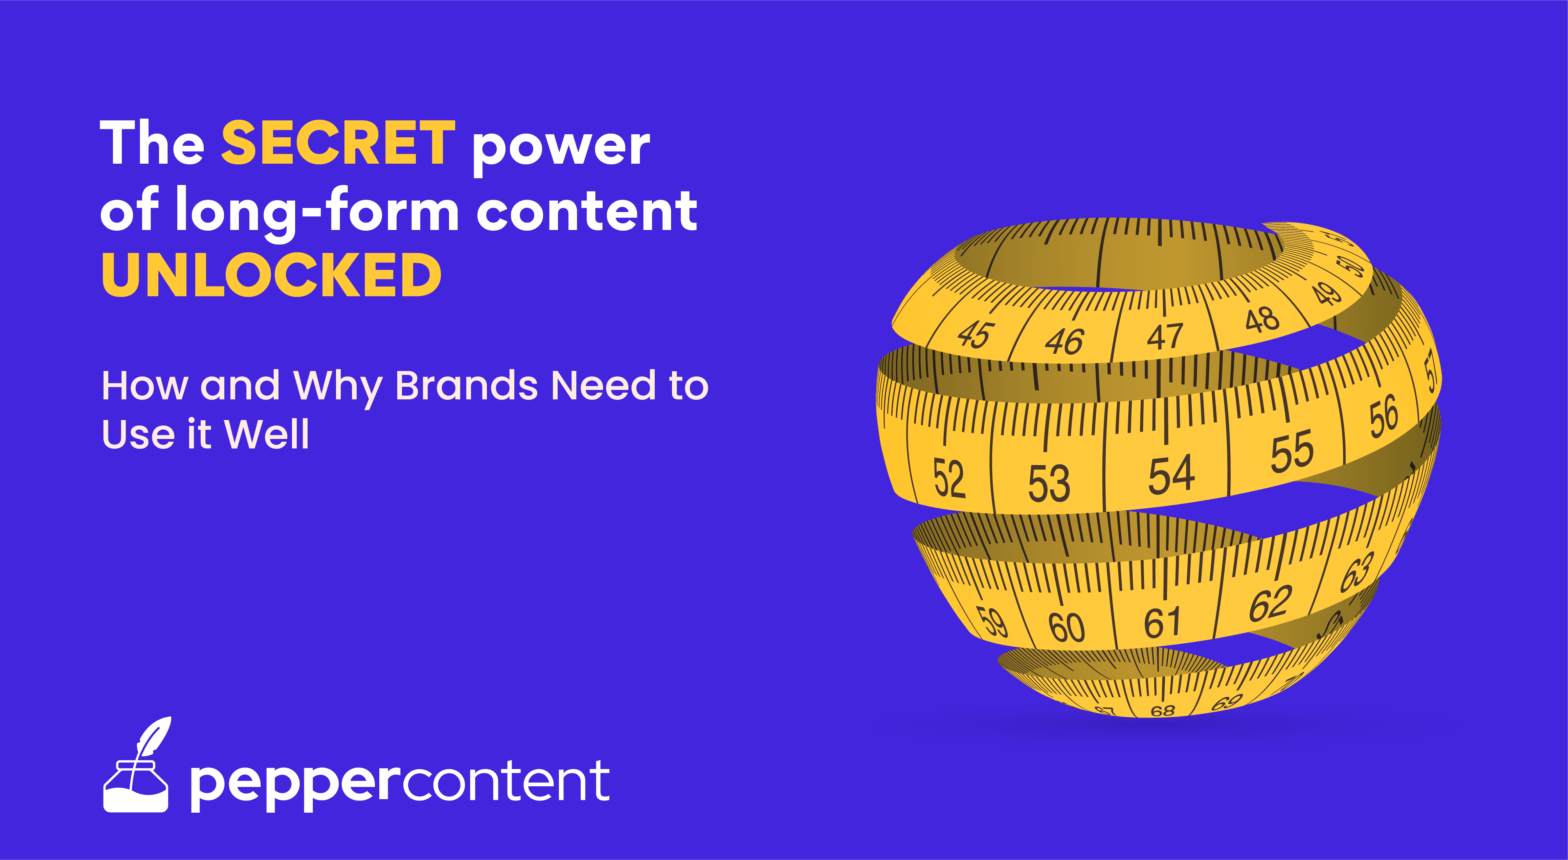 The Secret Power of Long-form Content Unlocked: How and Why Brands Need to Use it Well